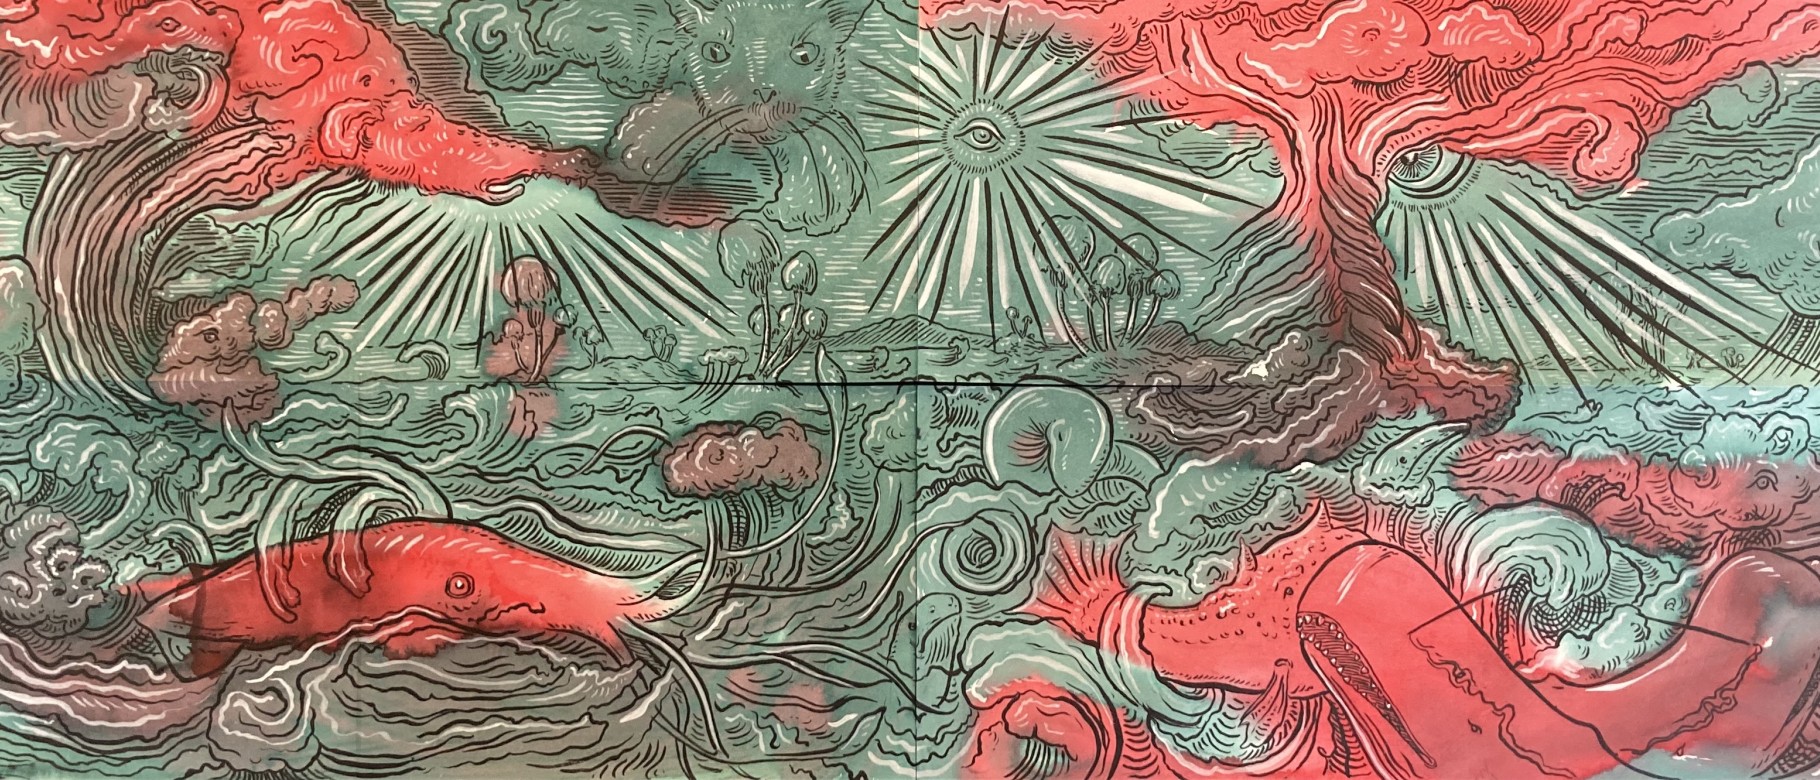 A green and red drawing of oceans and sea creatures